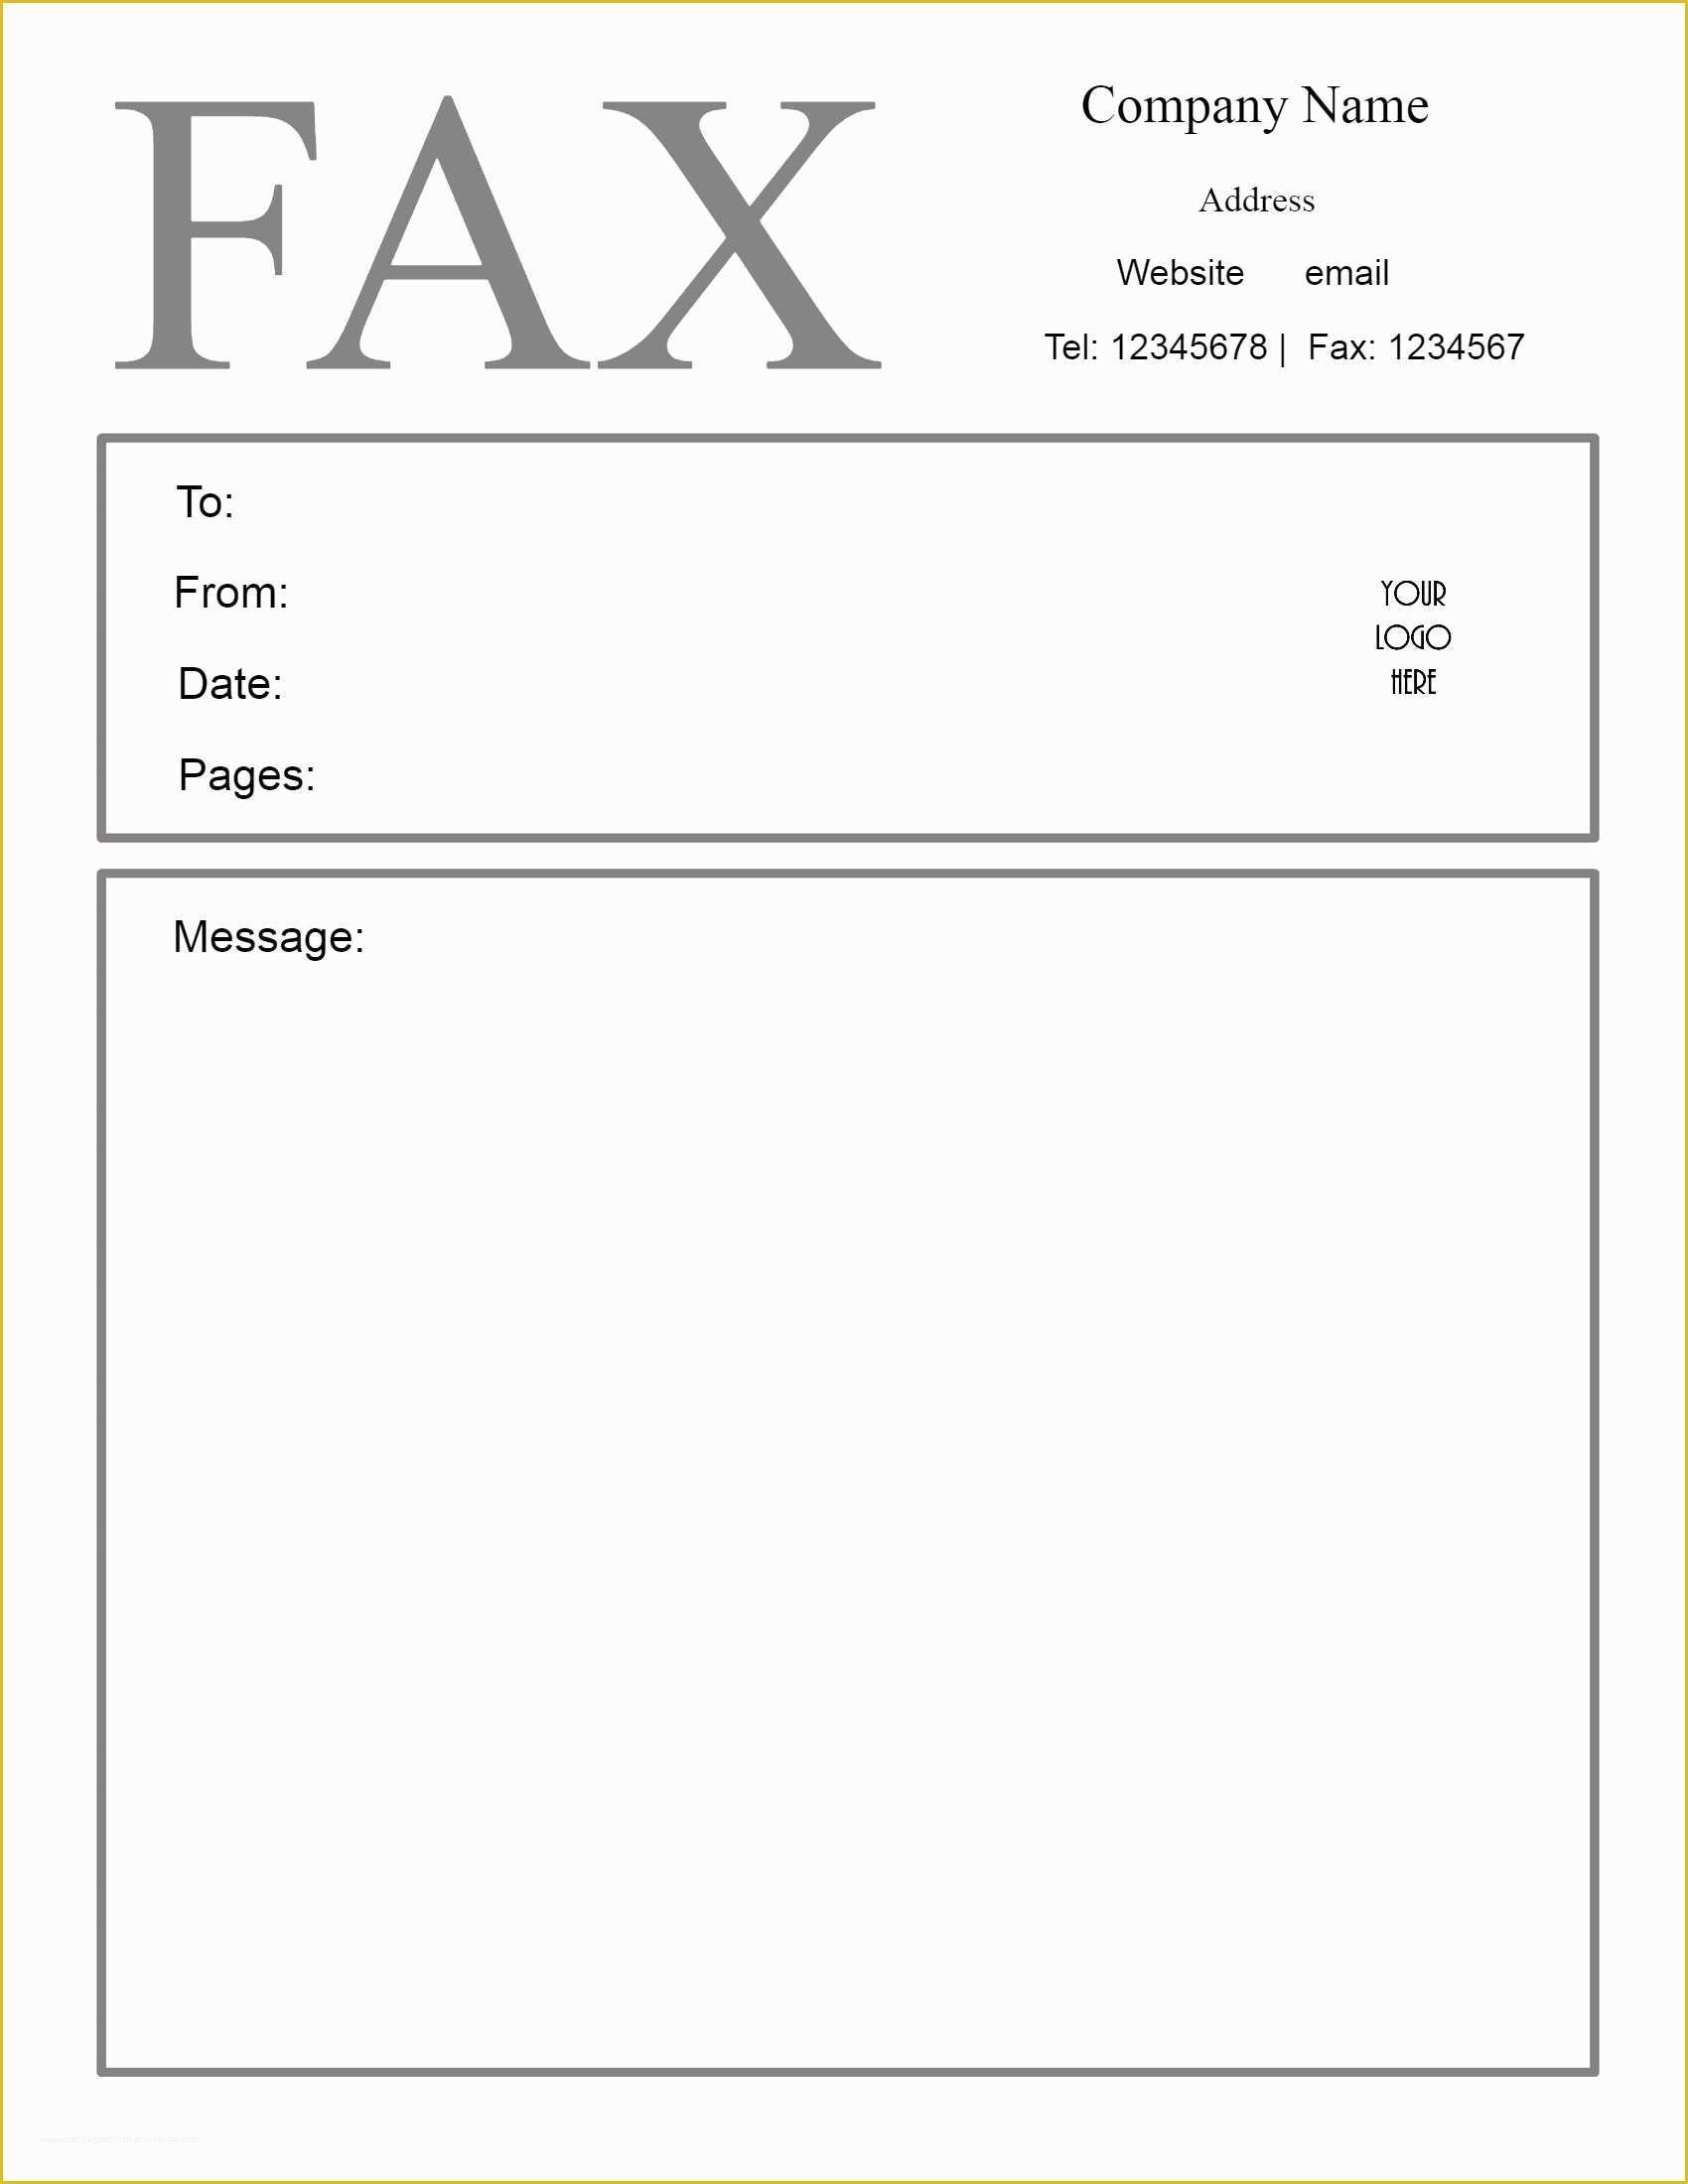 Fax Cover Sheet Template Free Of Free Fax Cover Sheet Template